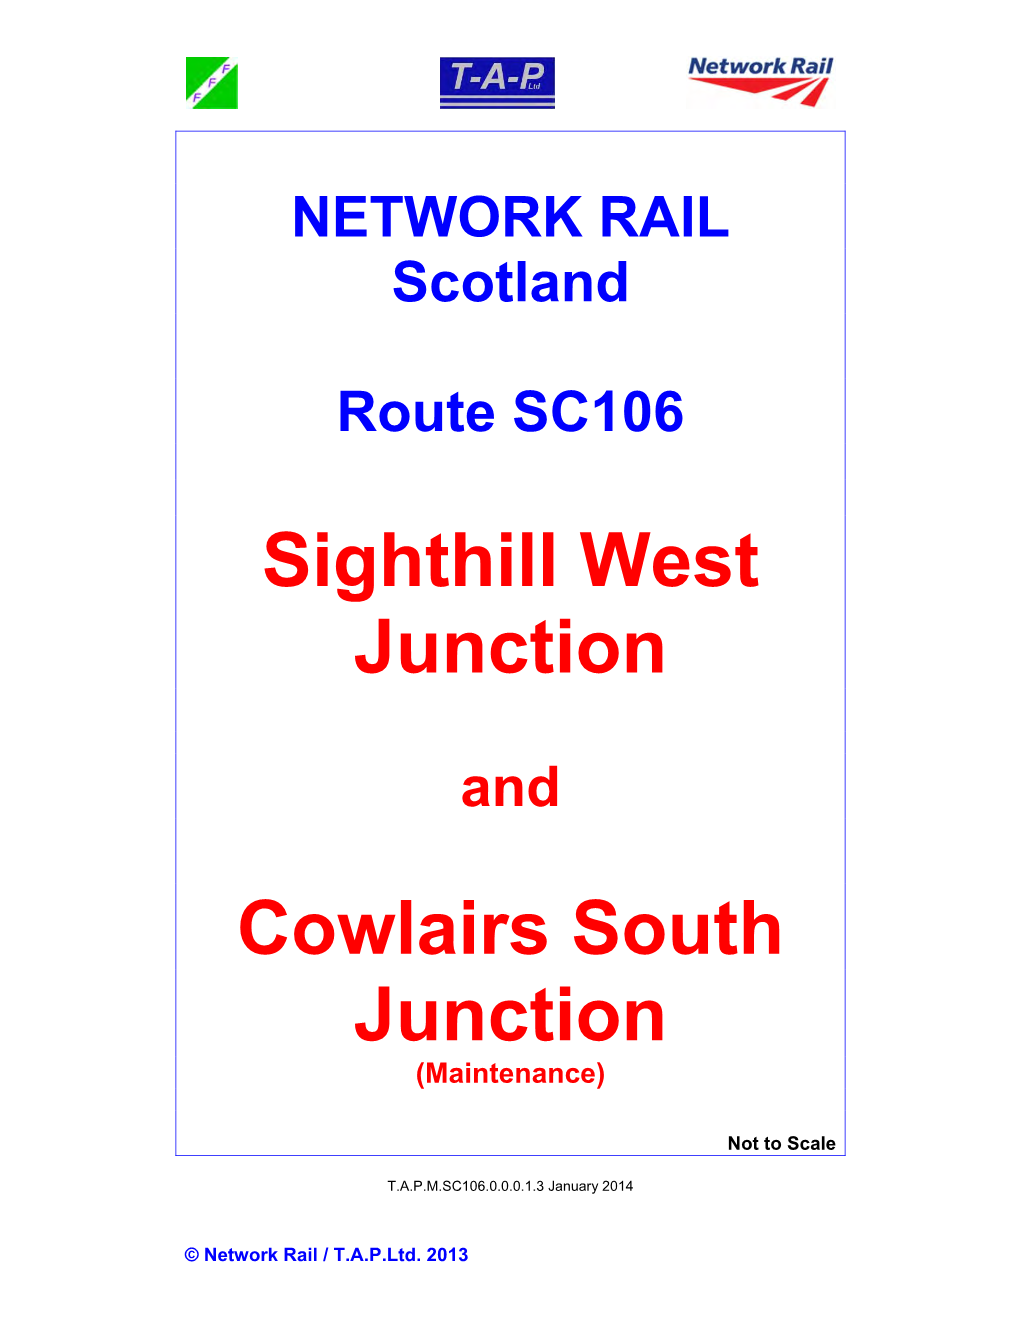 Sighthill West Junction Cowlairs South Junction